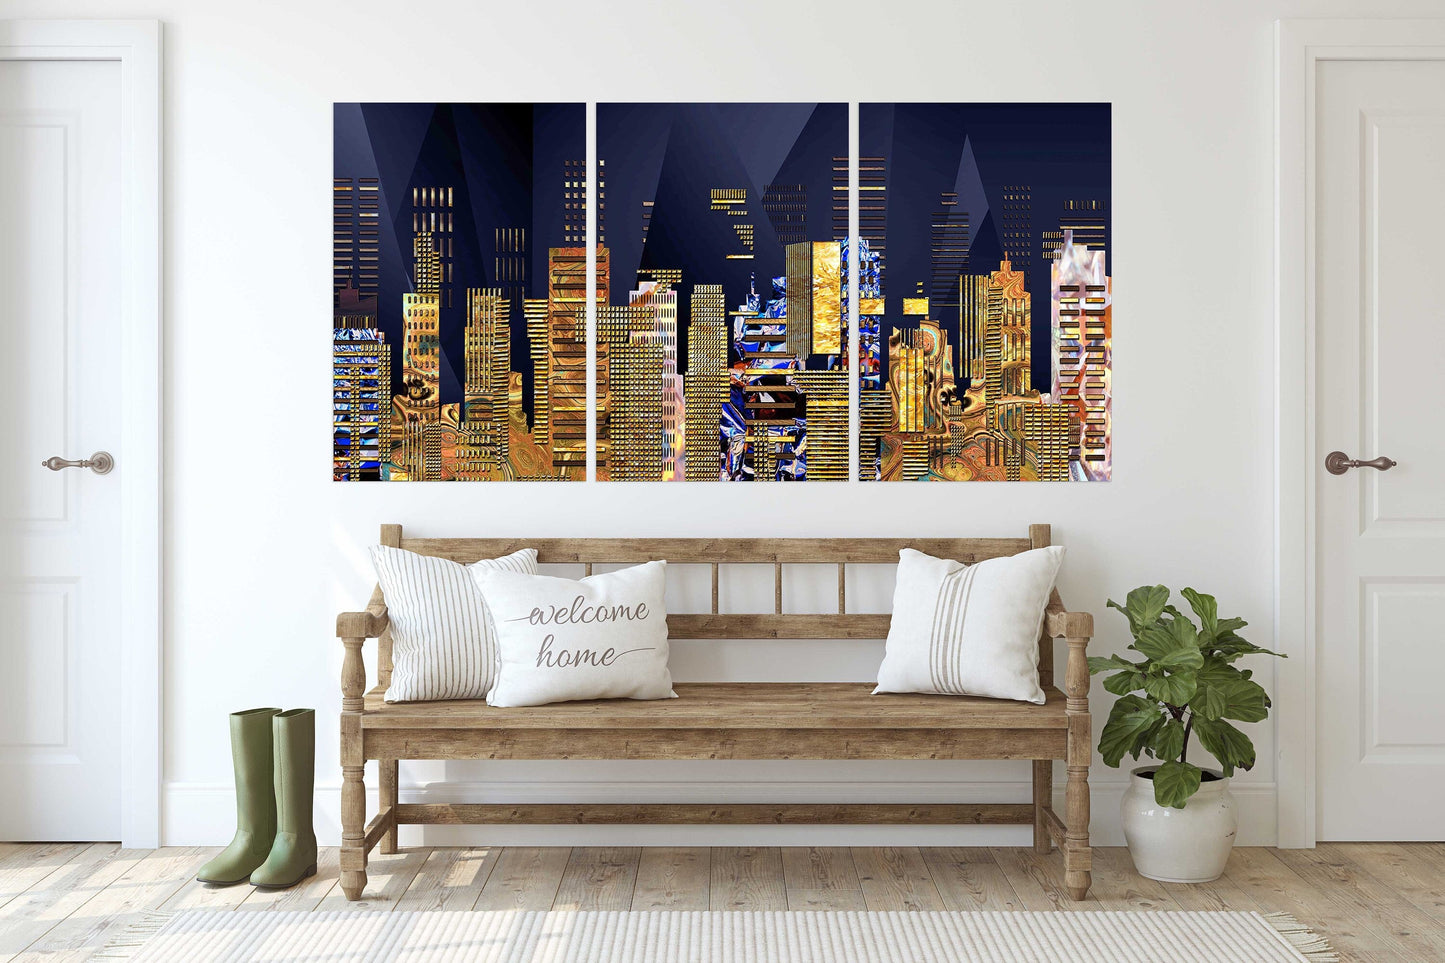 Night city Wall collage kit City at night decor Canvas painting Extra large multi panel wall art Picture frames Home wall decor picture